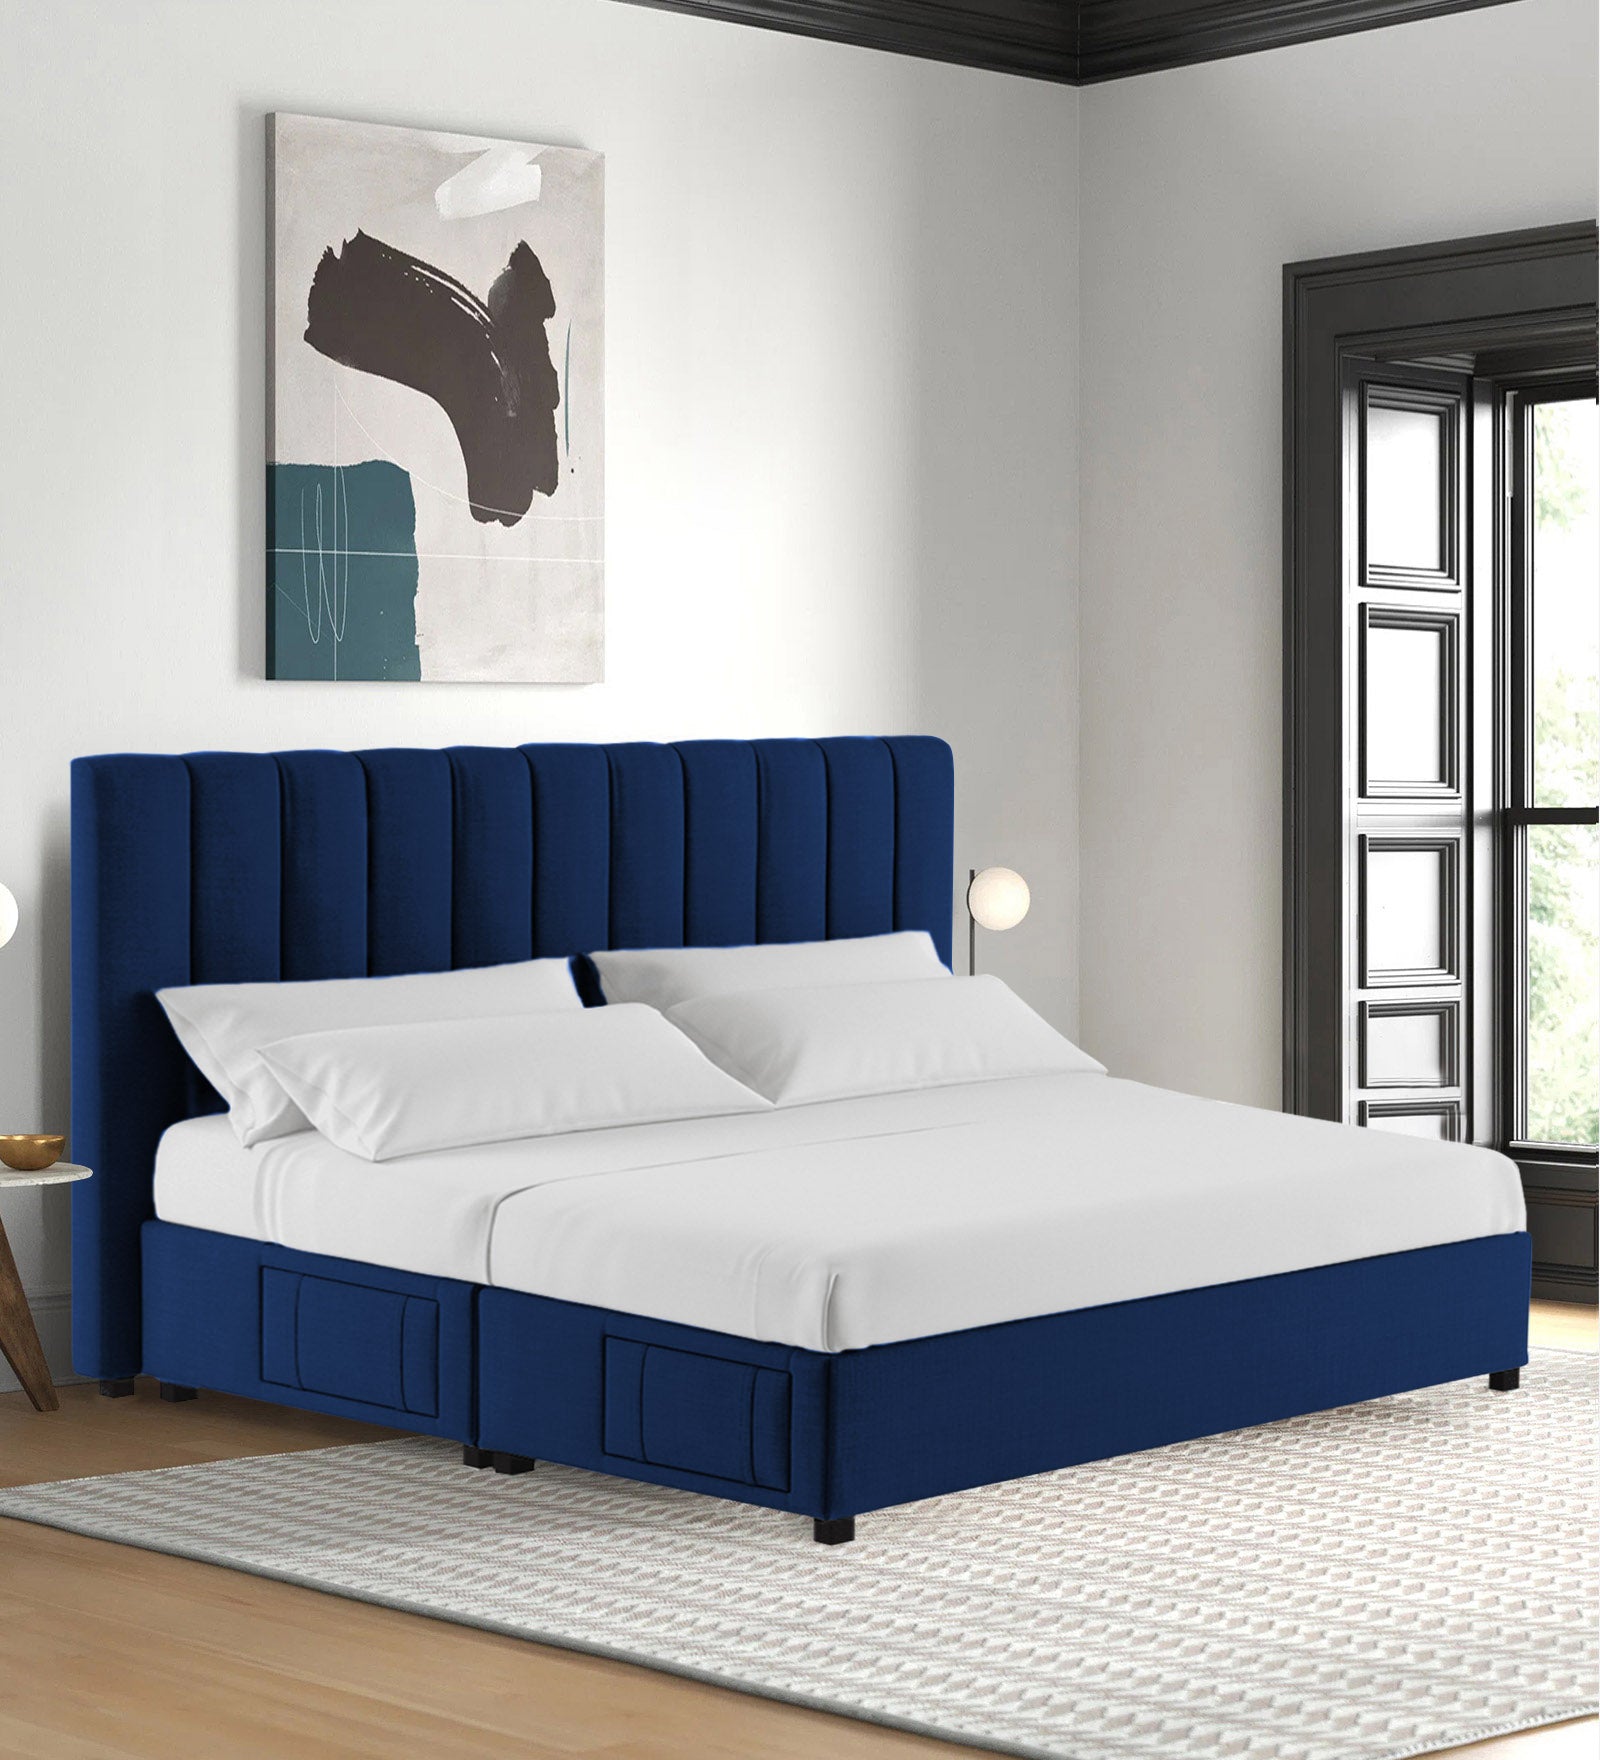 Nivi Fabric Queen Size Bed In Royal Blue Colour With Drawer Storage